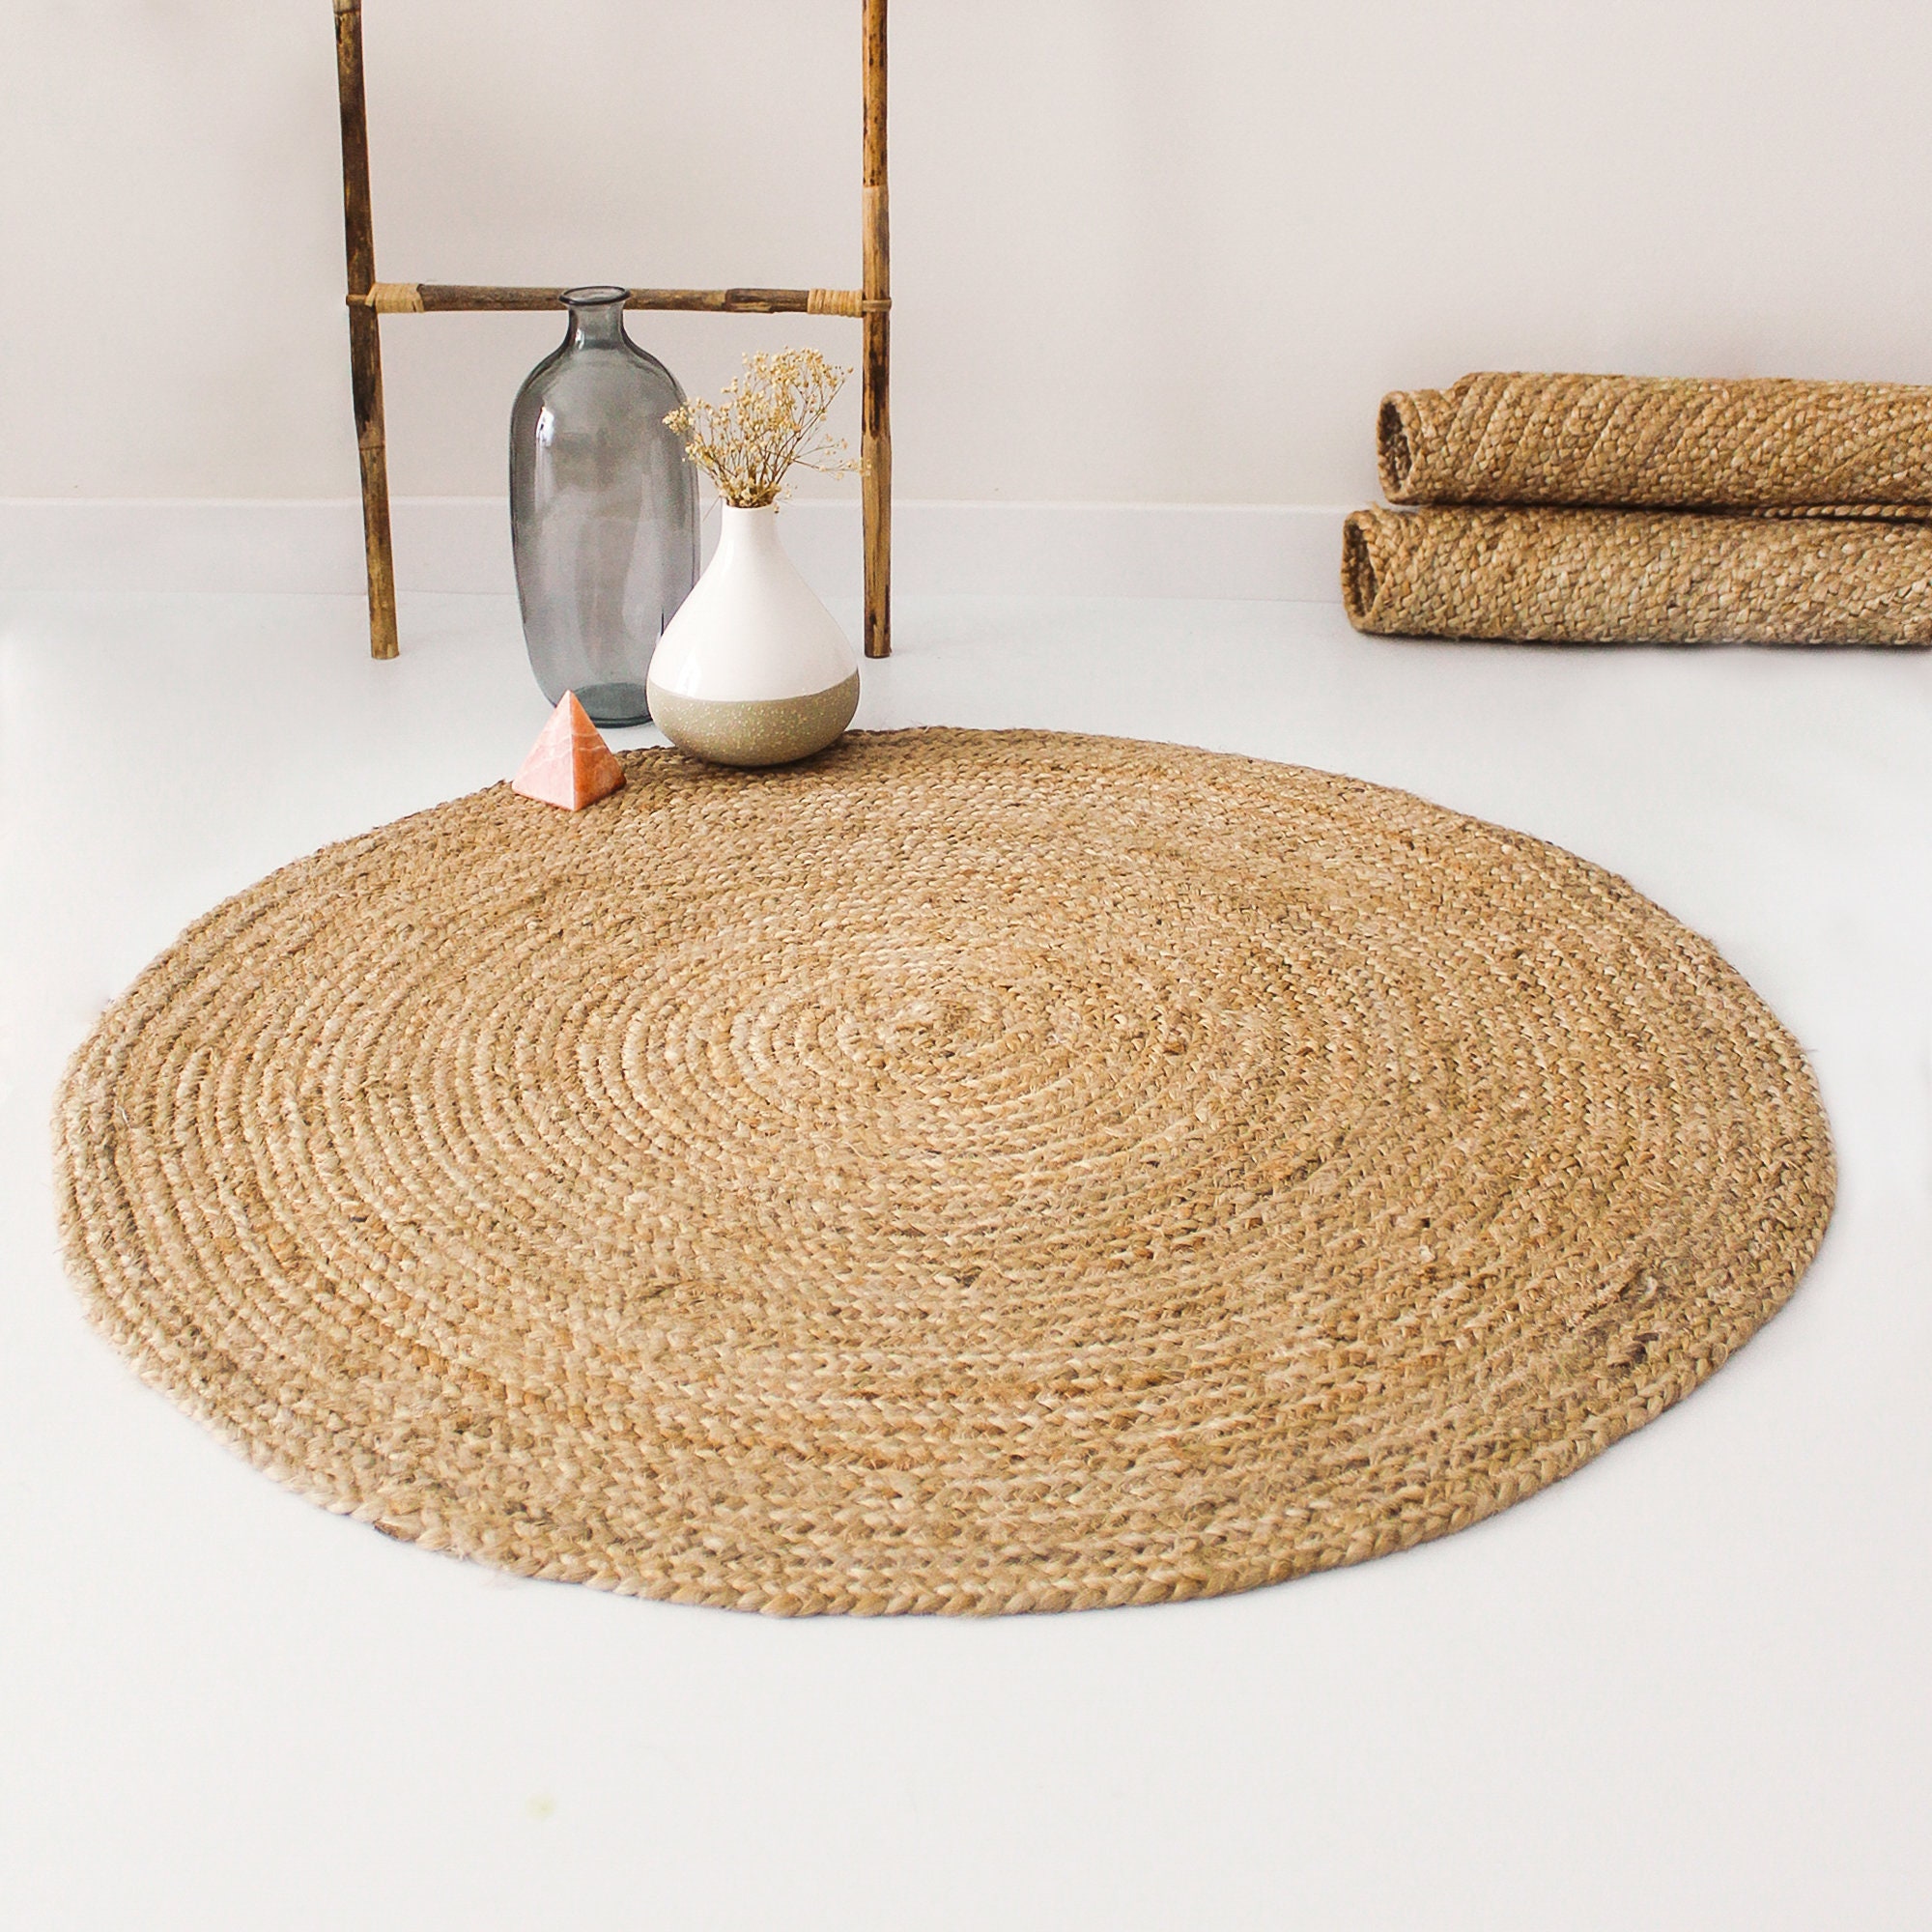 DIY Resized Jute Rug (From Standard to Custom!) - Driven by Decor